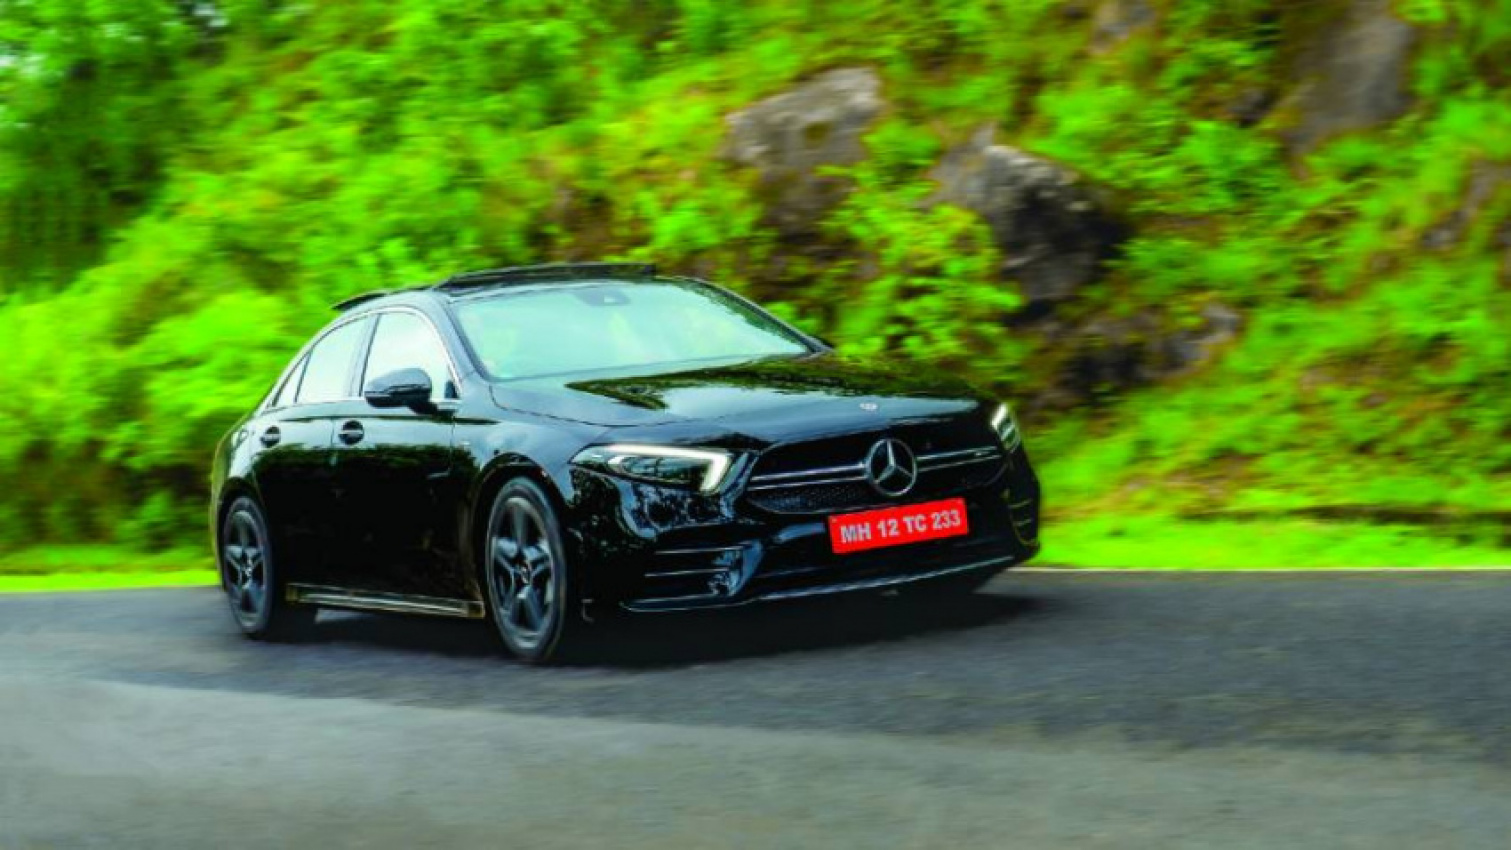 autos, cars, features, mercedes-benz, mg, a35 amg, a35 amg india, amg car india, amg price india, mercedes, mercedes-amg, mercedes-amg a 35, mercedes-amg a 35 4matic sedan, mercedes-amg a 35 4matic sedan price india 2021, mercedes-amg a 35 engine, mercedes-amg a 35 interiors, mercedes-amg a 35 price india, mercedes-amg a 35 specification, overdrive, vnex, performance meets luxury with the  mercedes-amg a 35 4matic